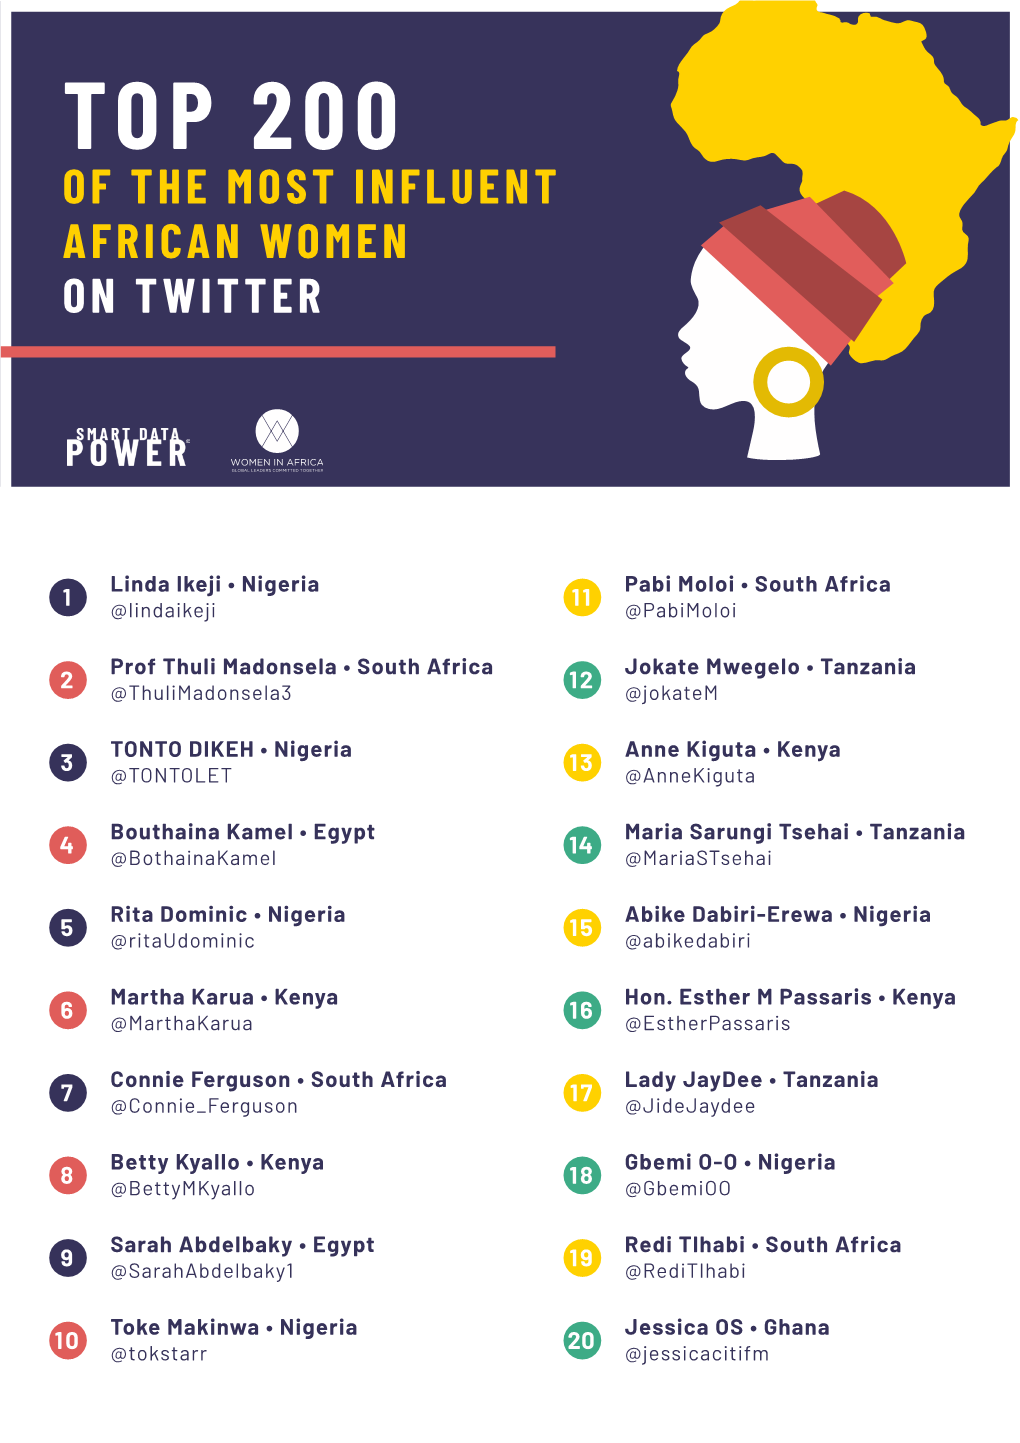 Top 200 of the Most Influent African Women on Twitter